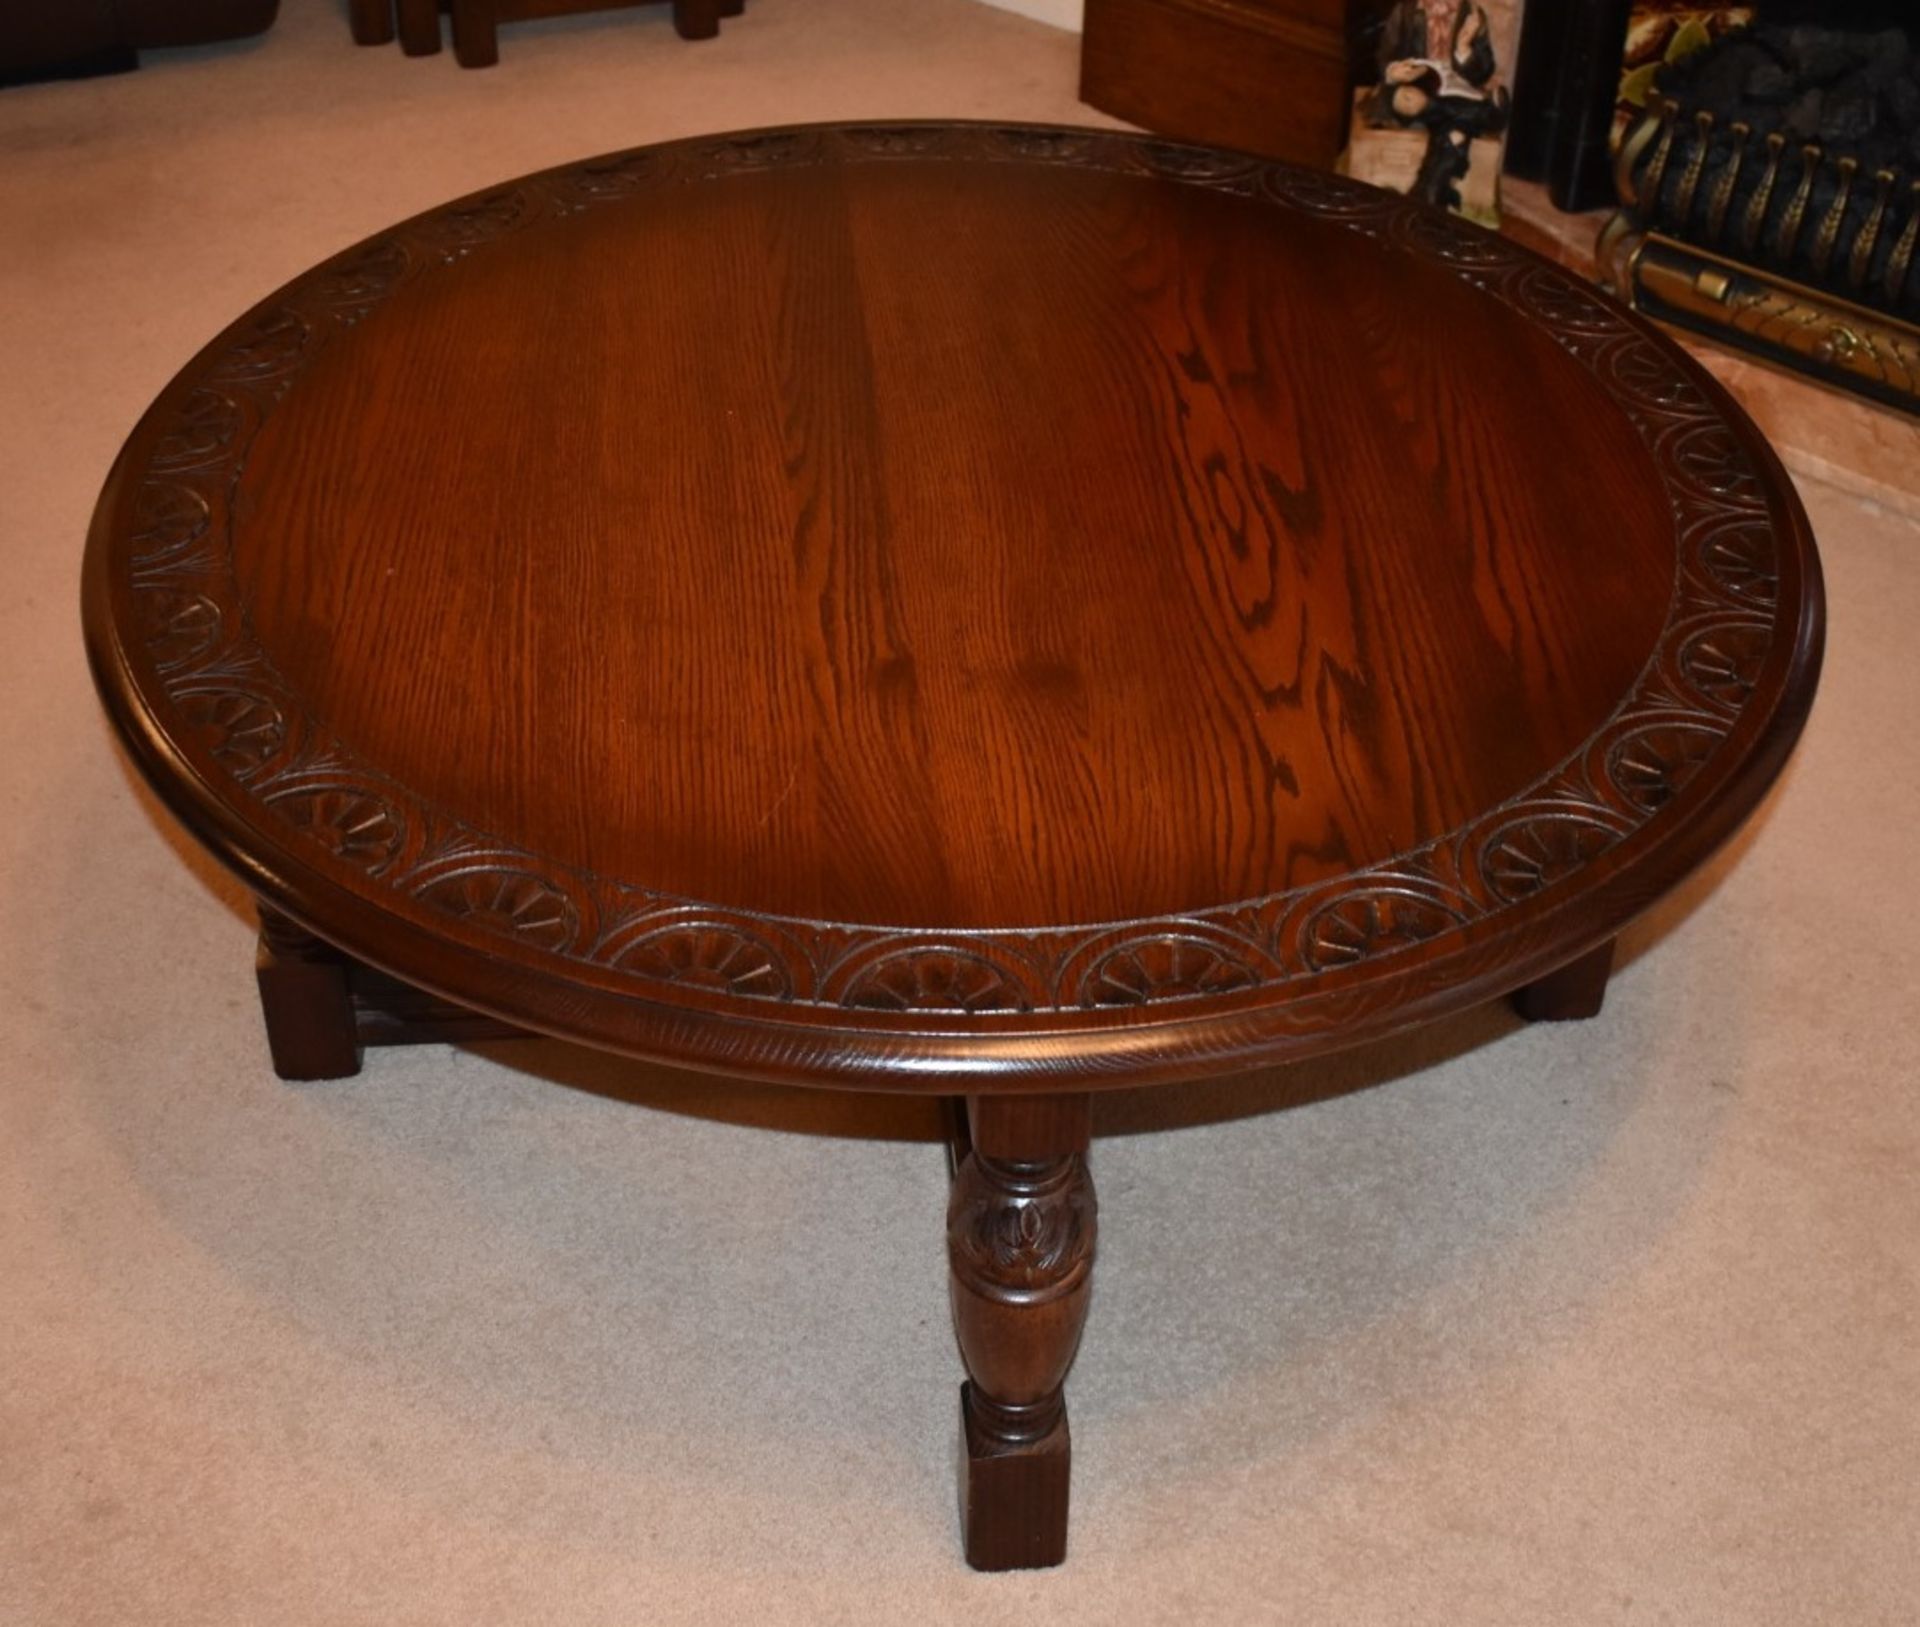 1 x Round Carved Oak Coffee Table By Jaycee - JacobeanStyle With Turned Legs, Joining Stretchers and - Image 2 of 8